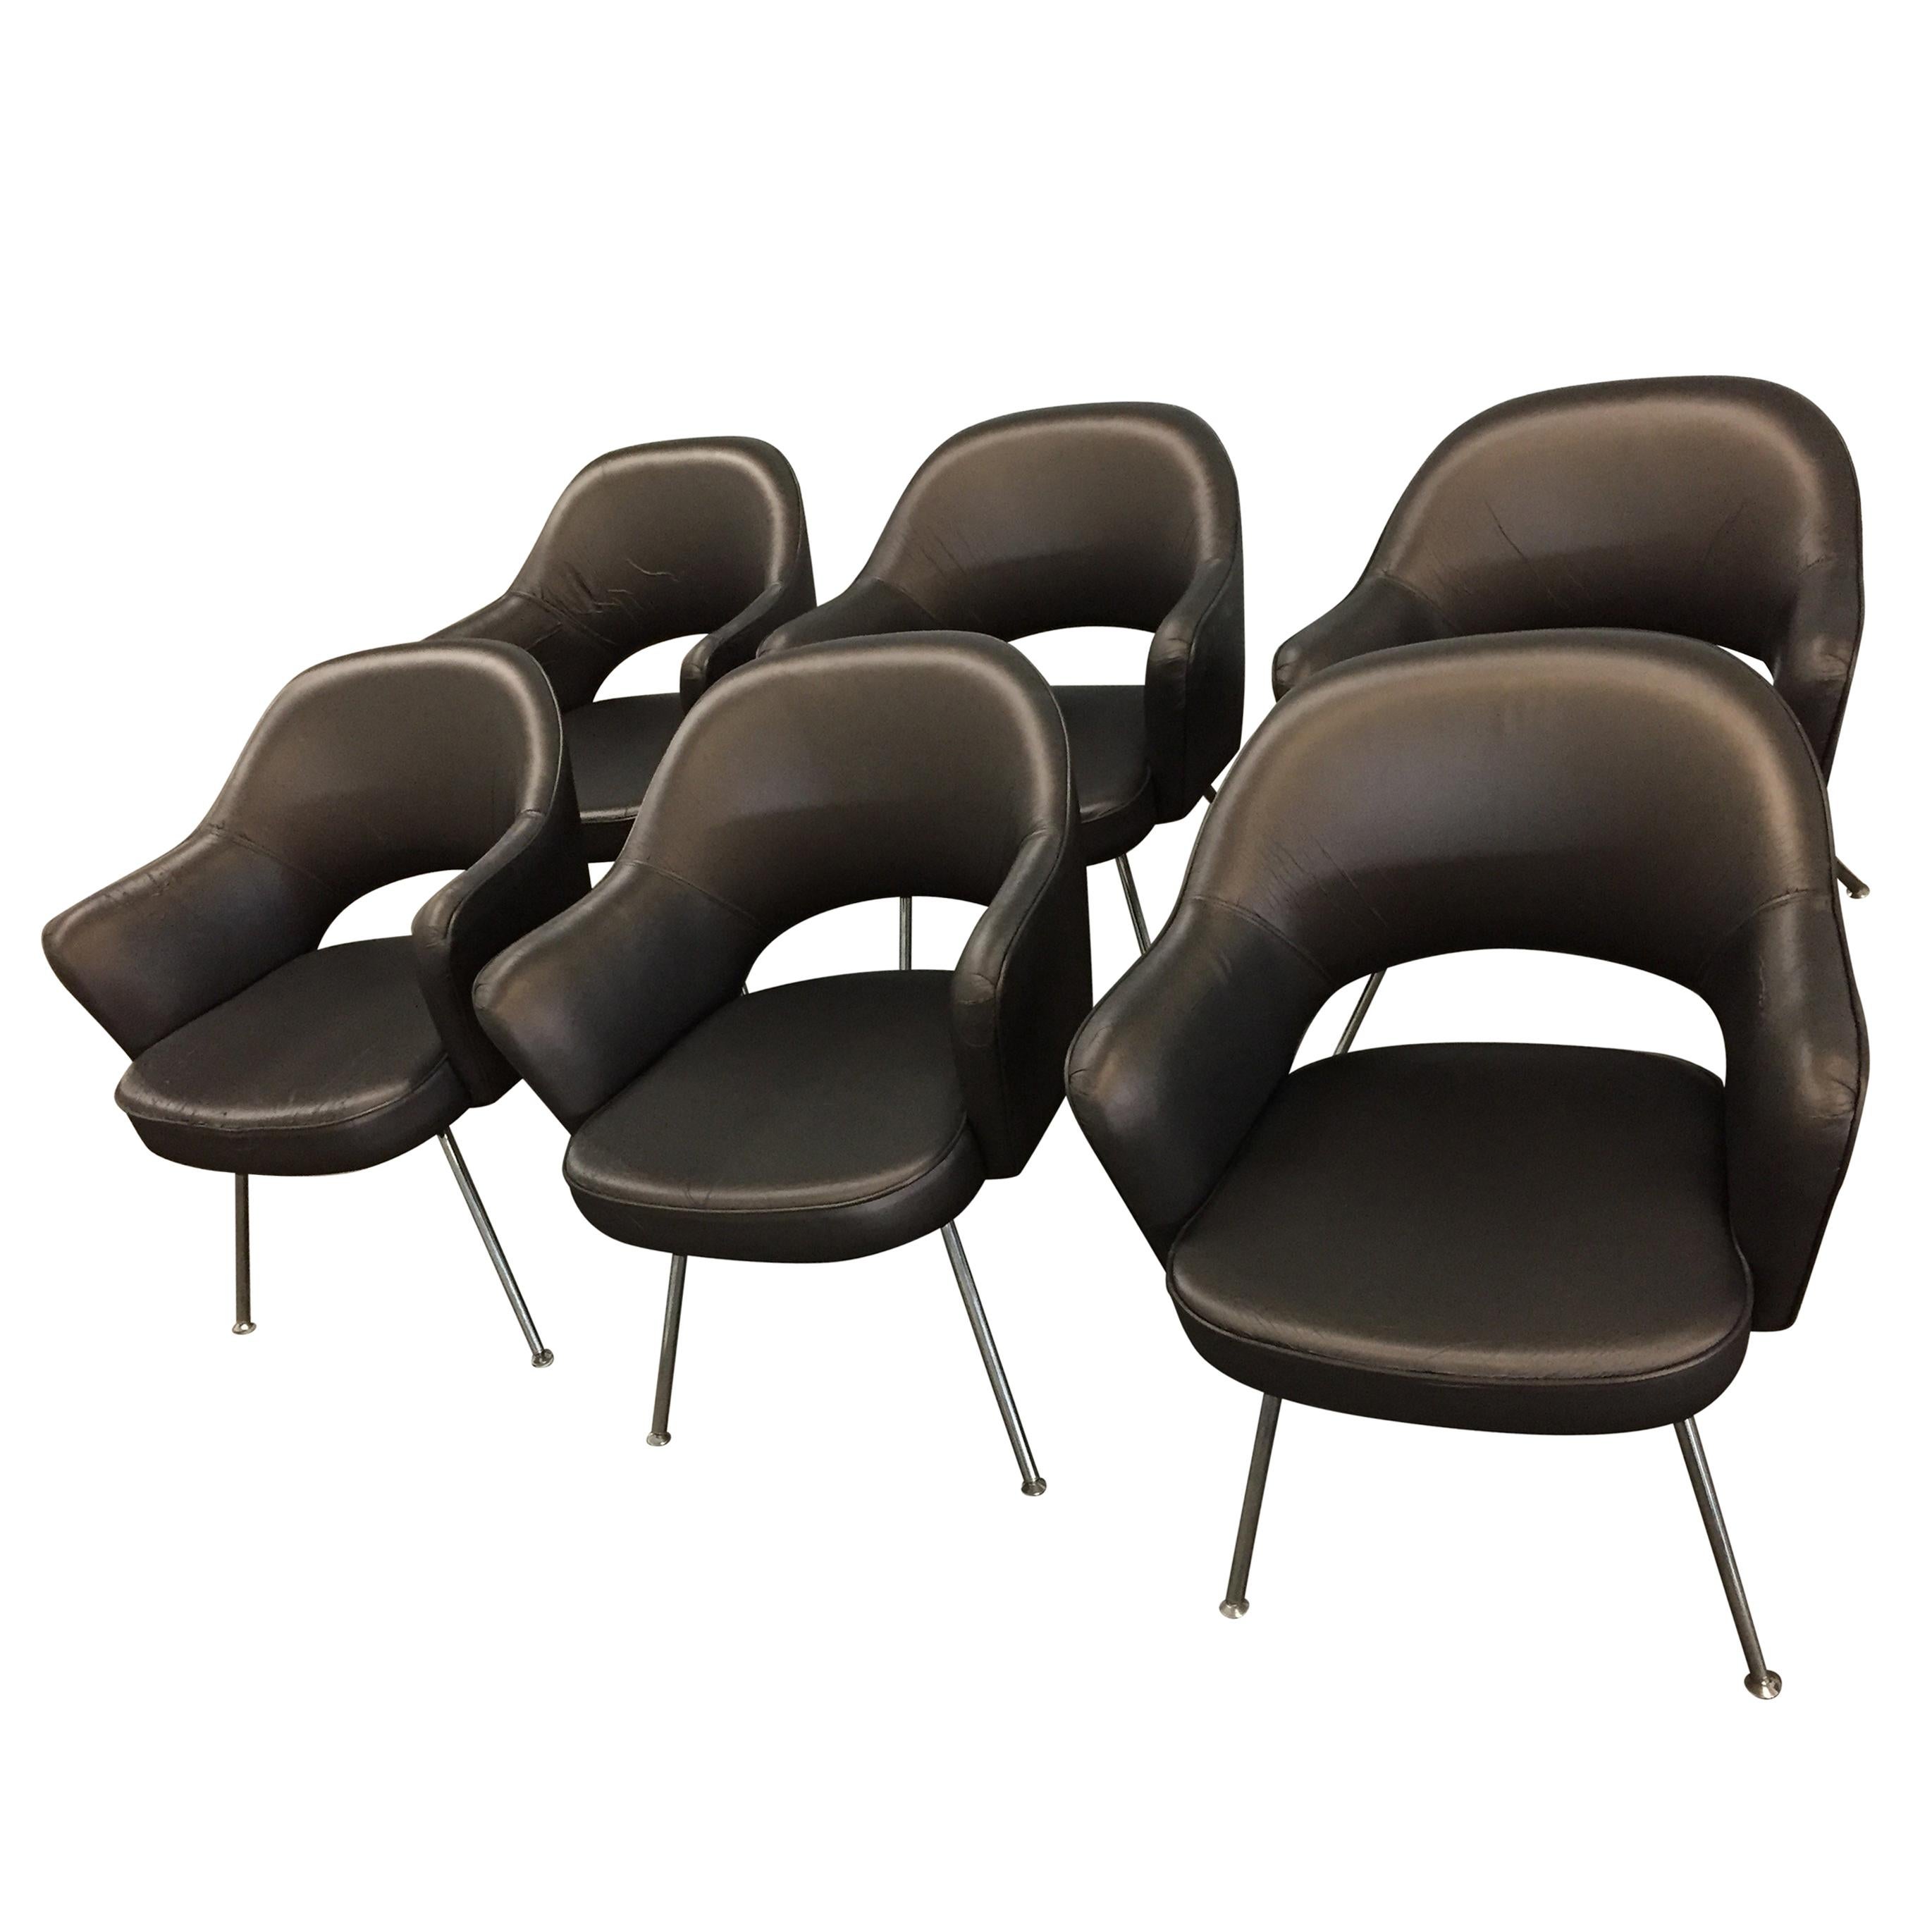 1975 Knoll Saarinen Executive Dining or Office Chairs/ Set of 6 For Sale